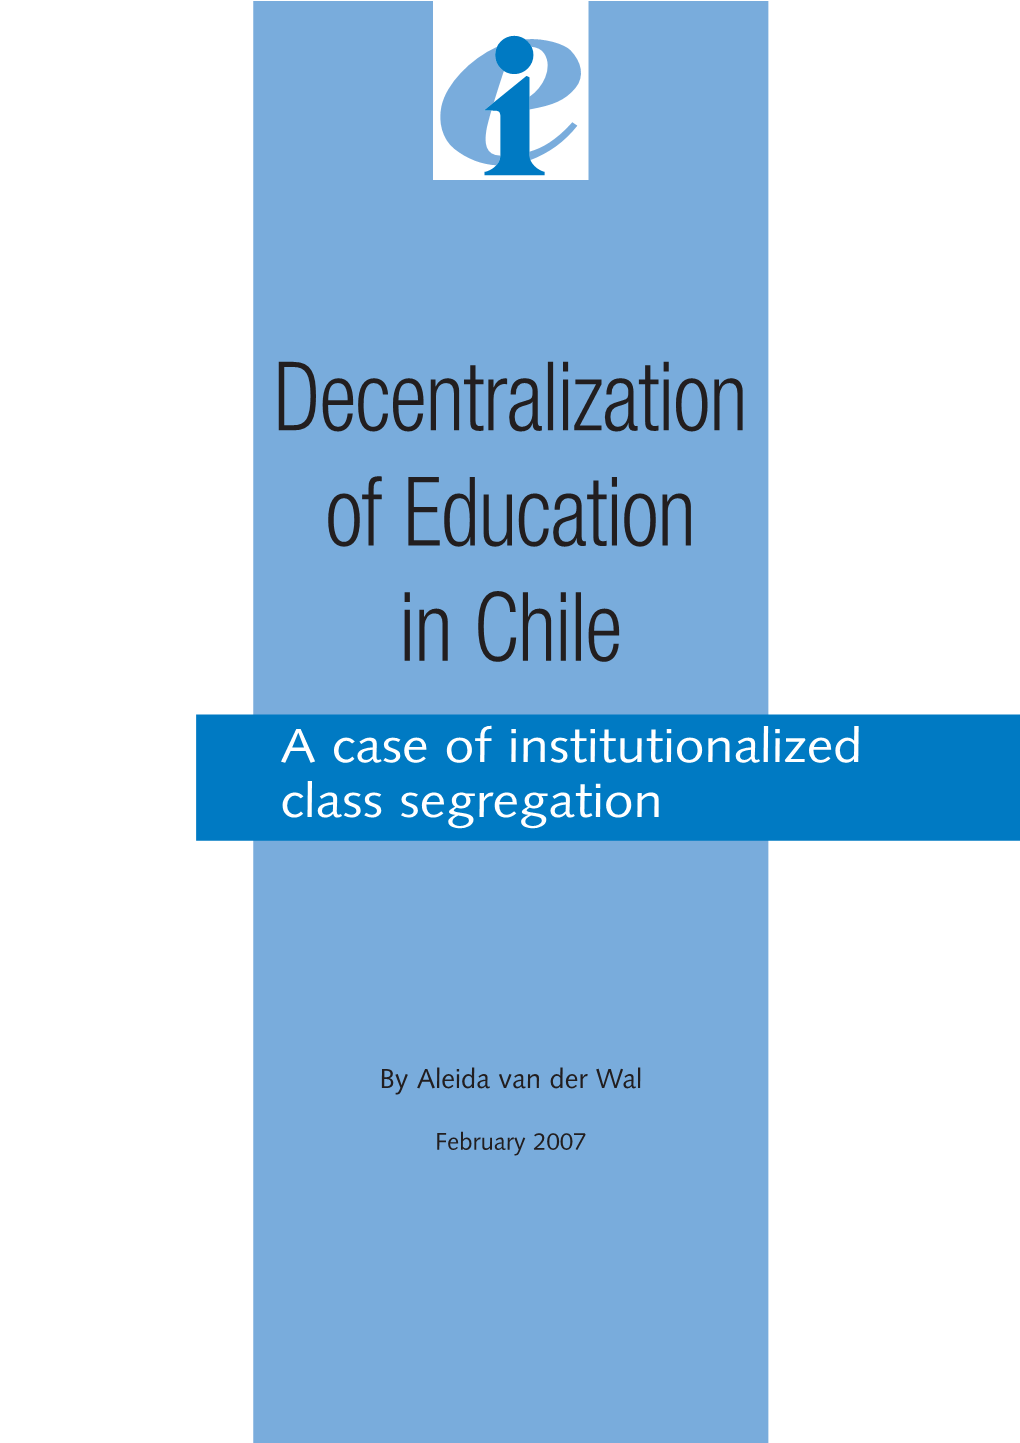 Decentralization of Education in Chile